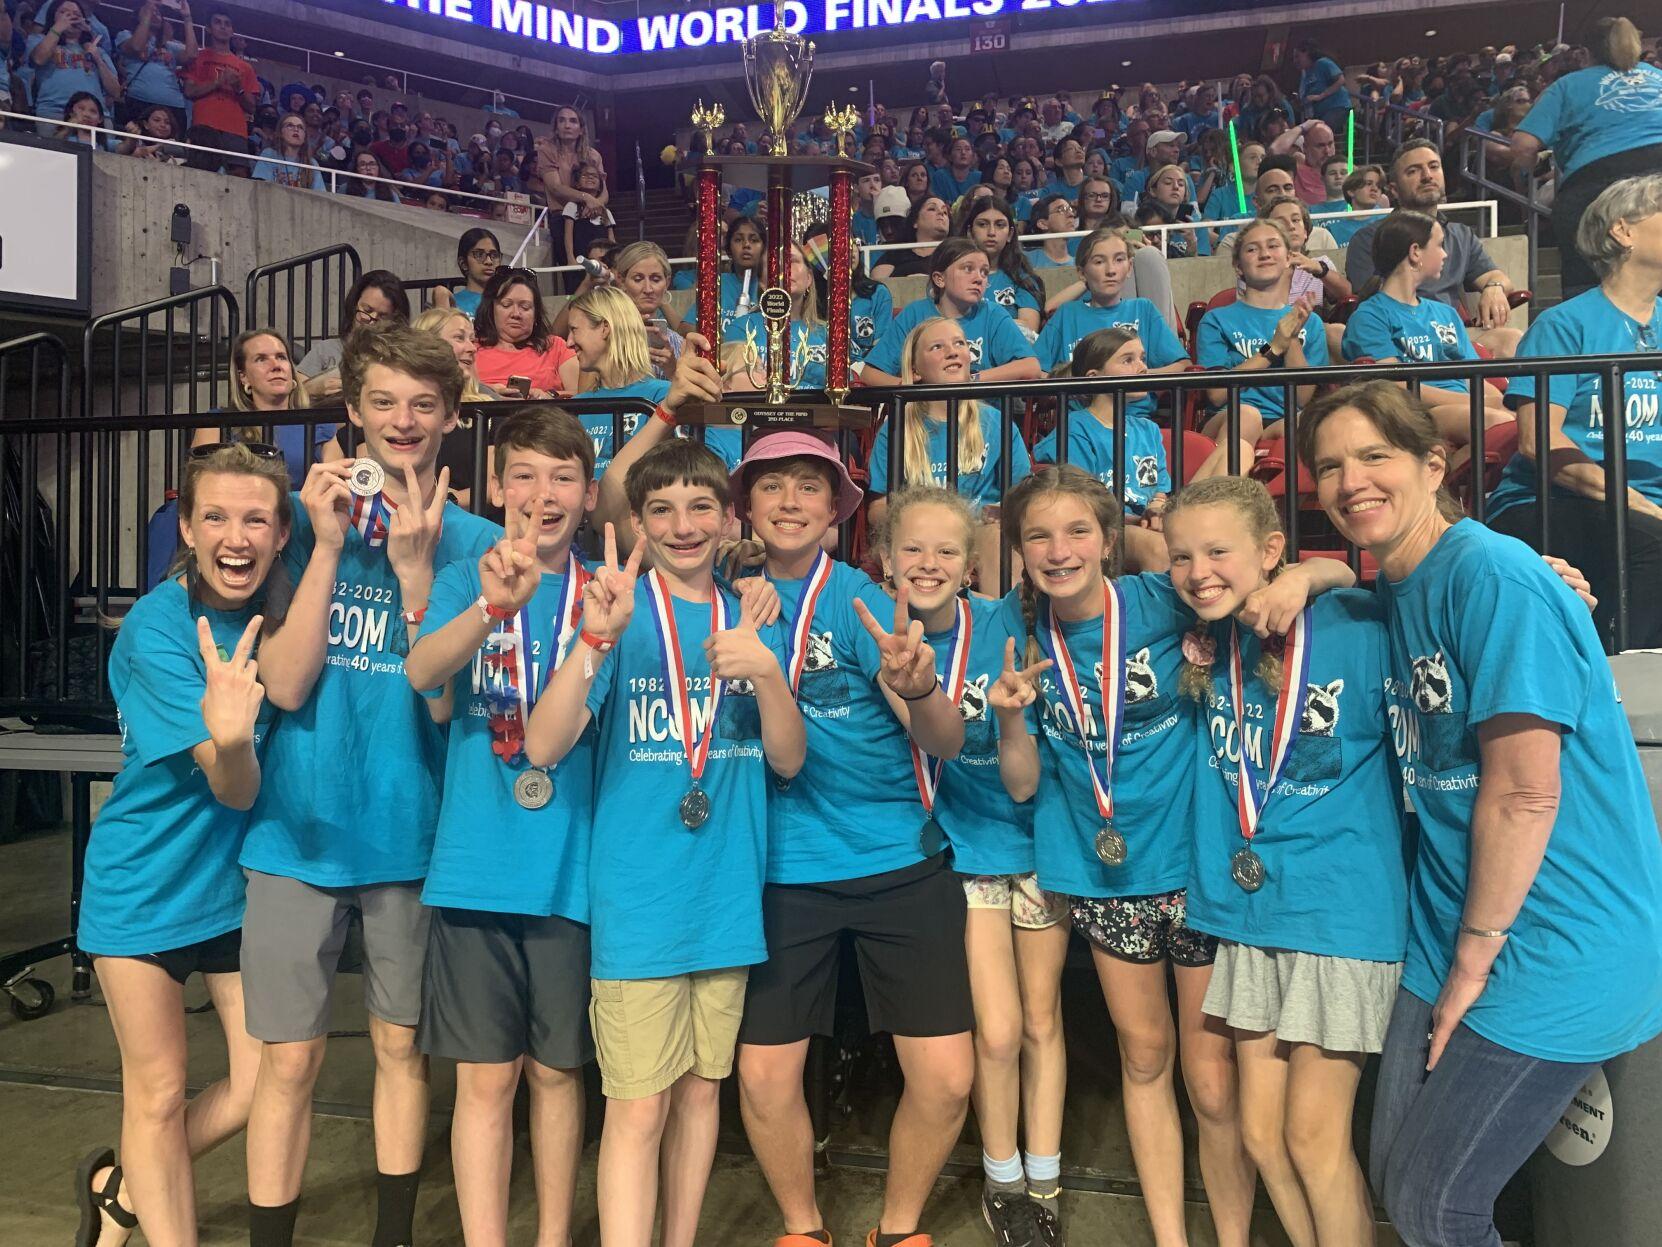 middle-school-team-global-odyssey-runners-up-news-thepilot